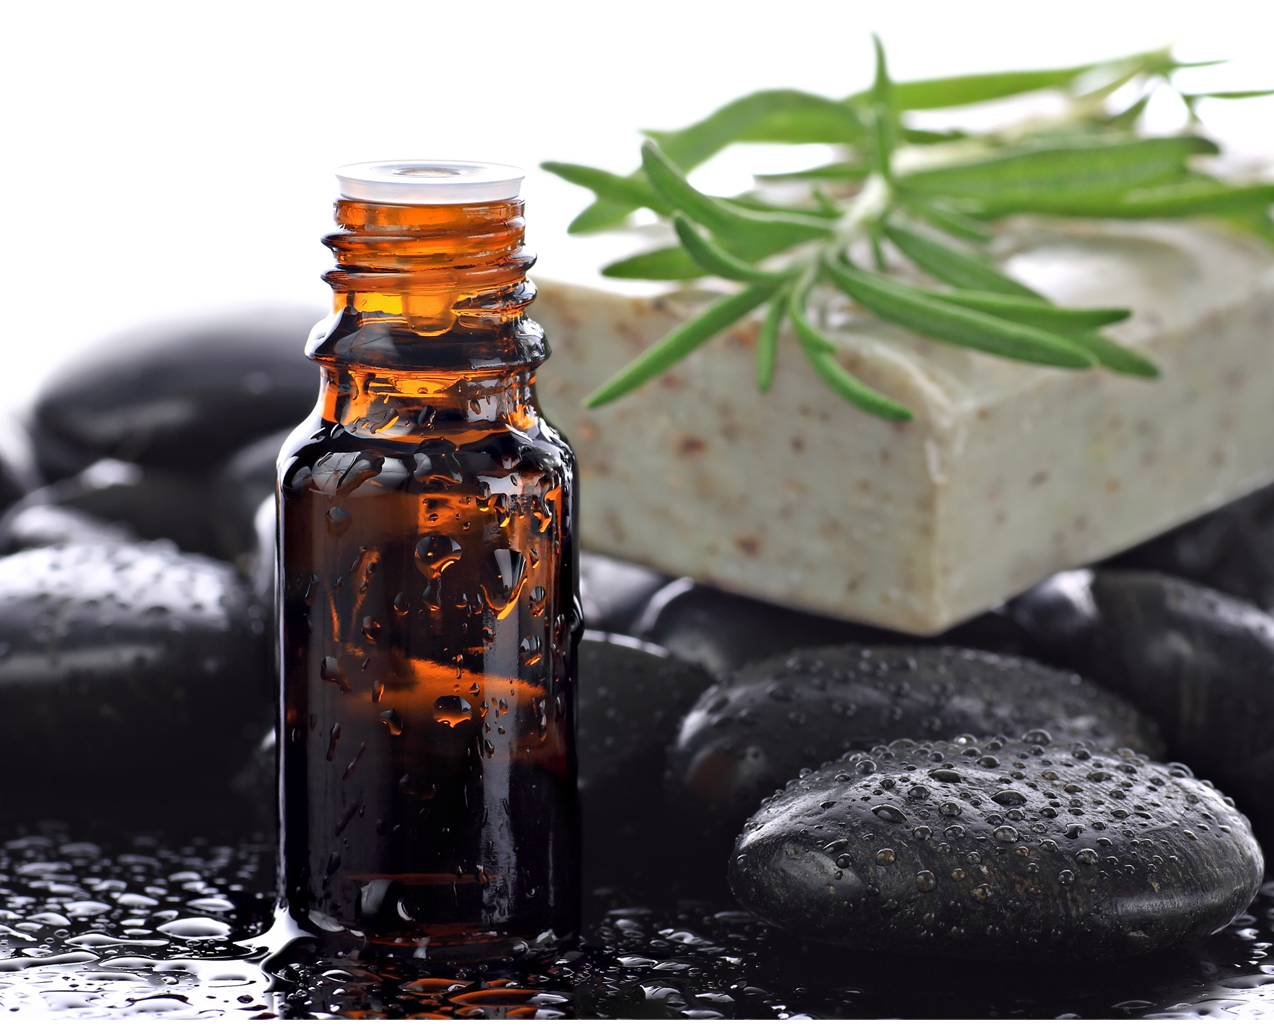 essential oils, aromatherapy, holistic health and wellbeing